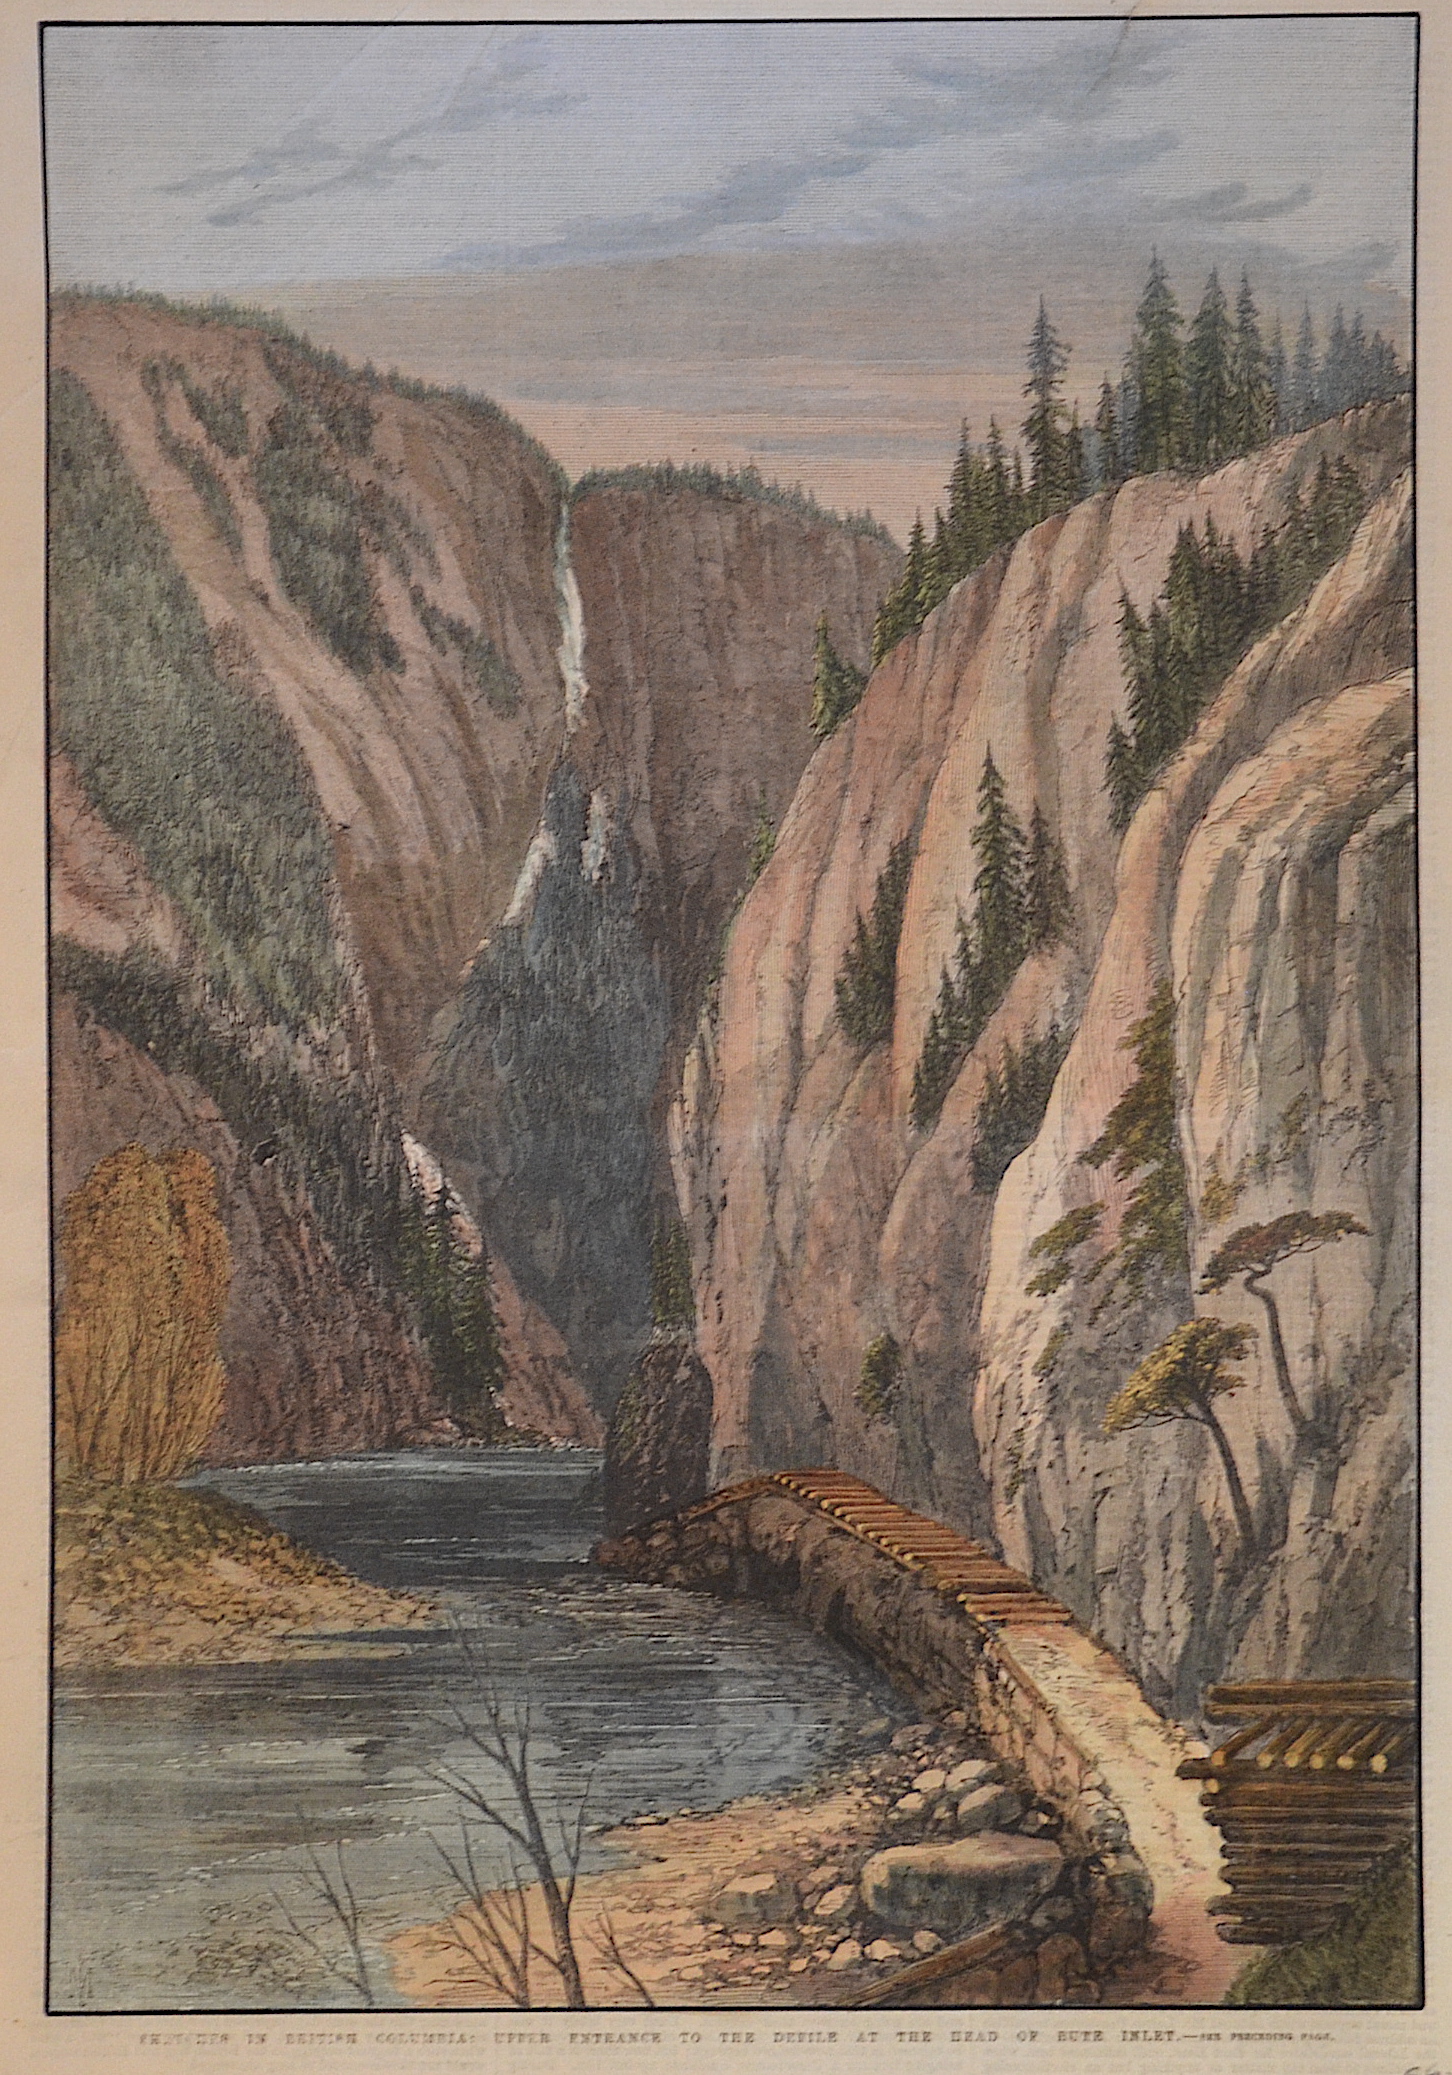 Anonymus  Sketches in British Columbia: Upper entrance to the defile at the head of Bute Inlet.